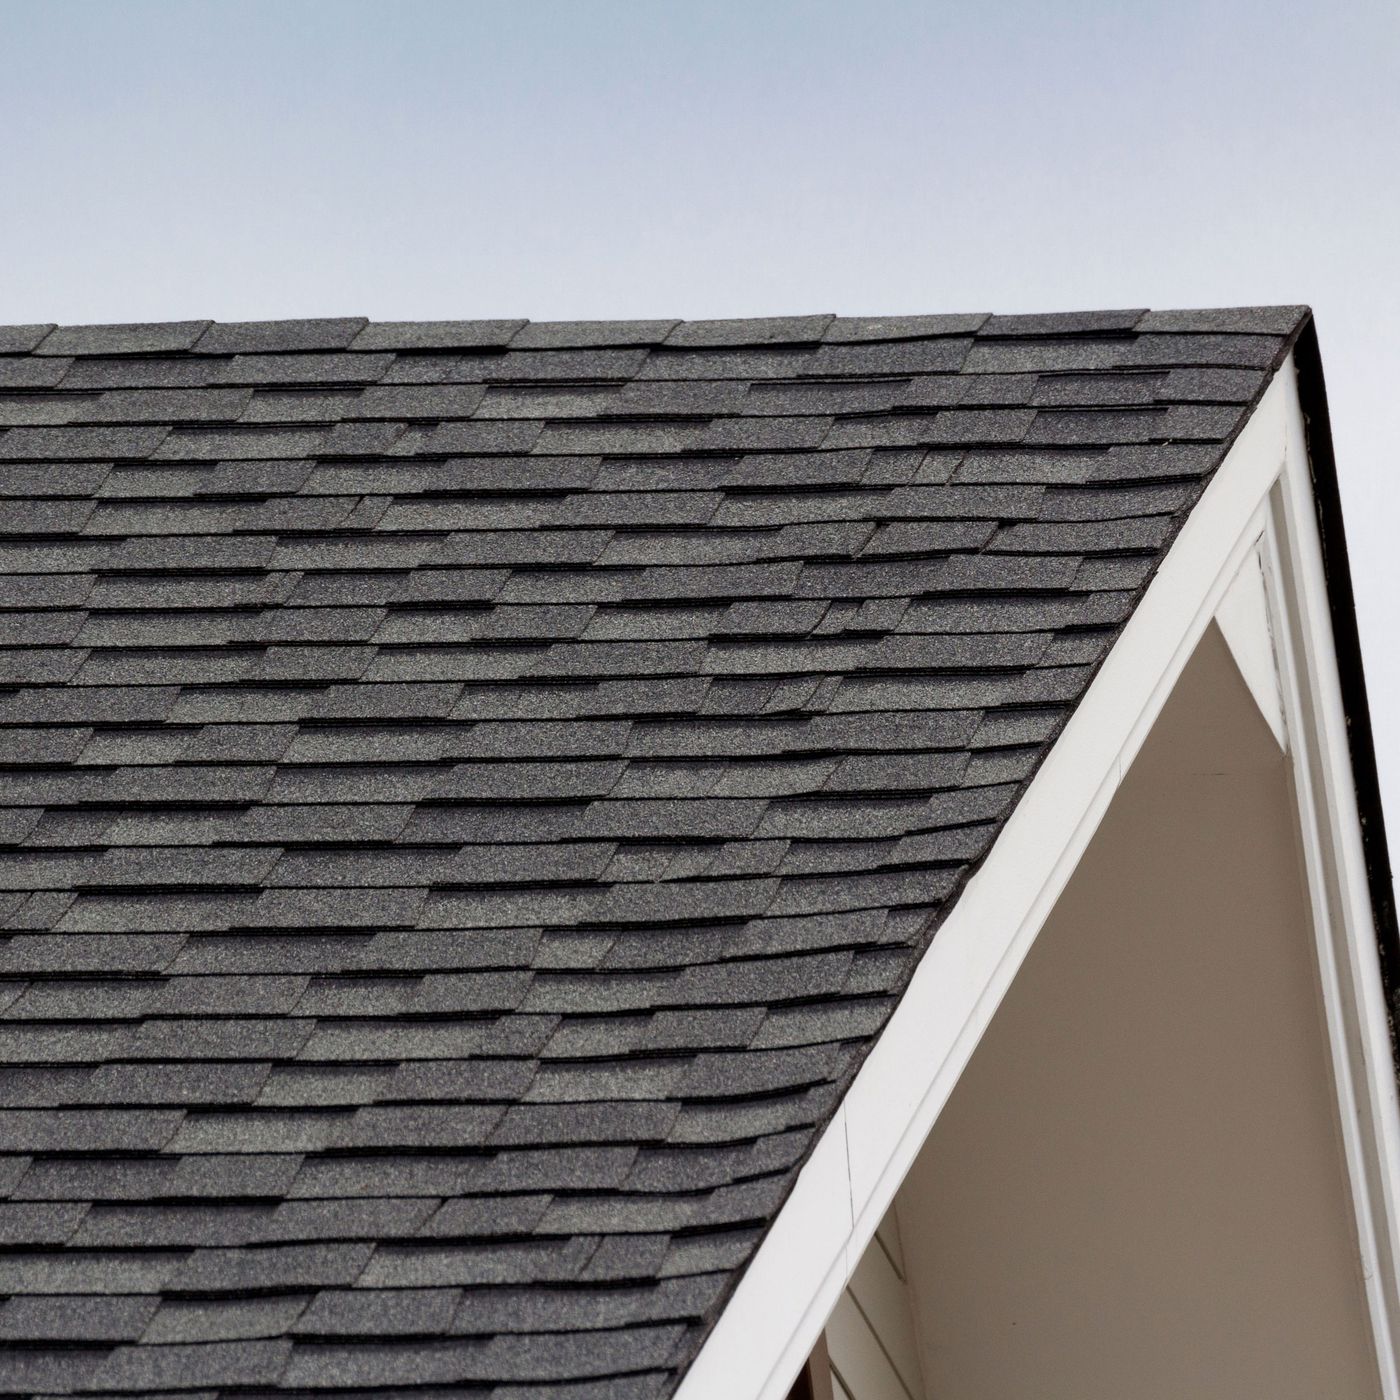 What is the Fastest Way to Patch a Roof?